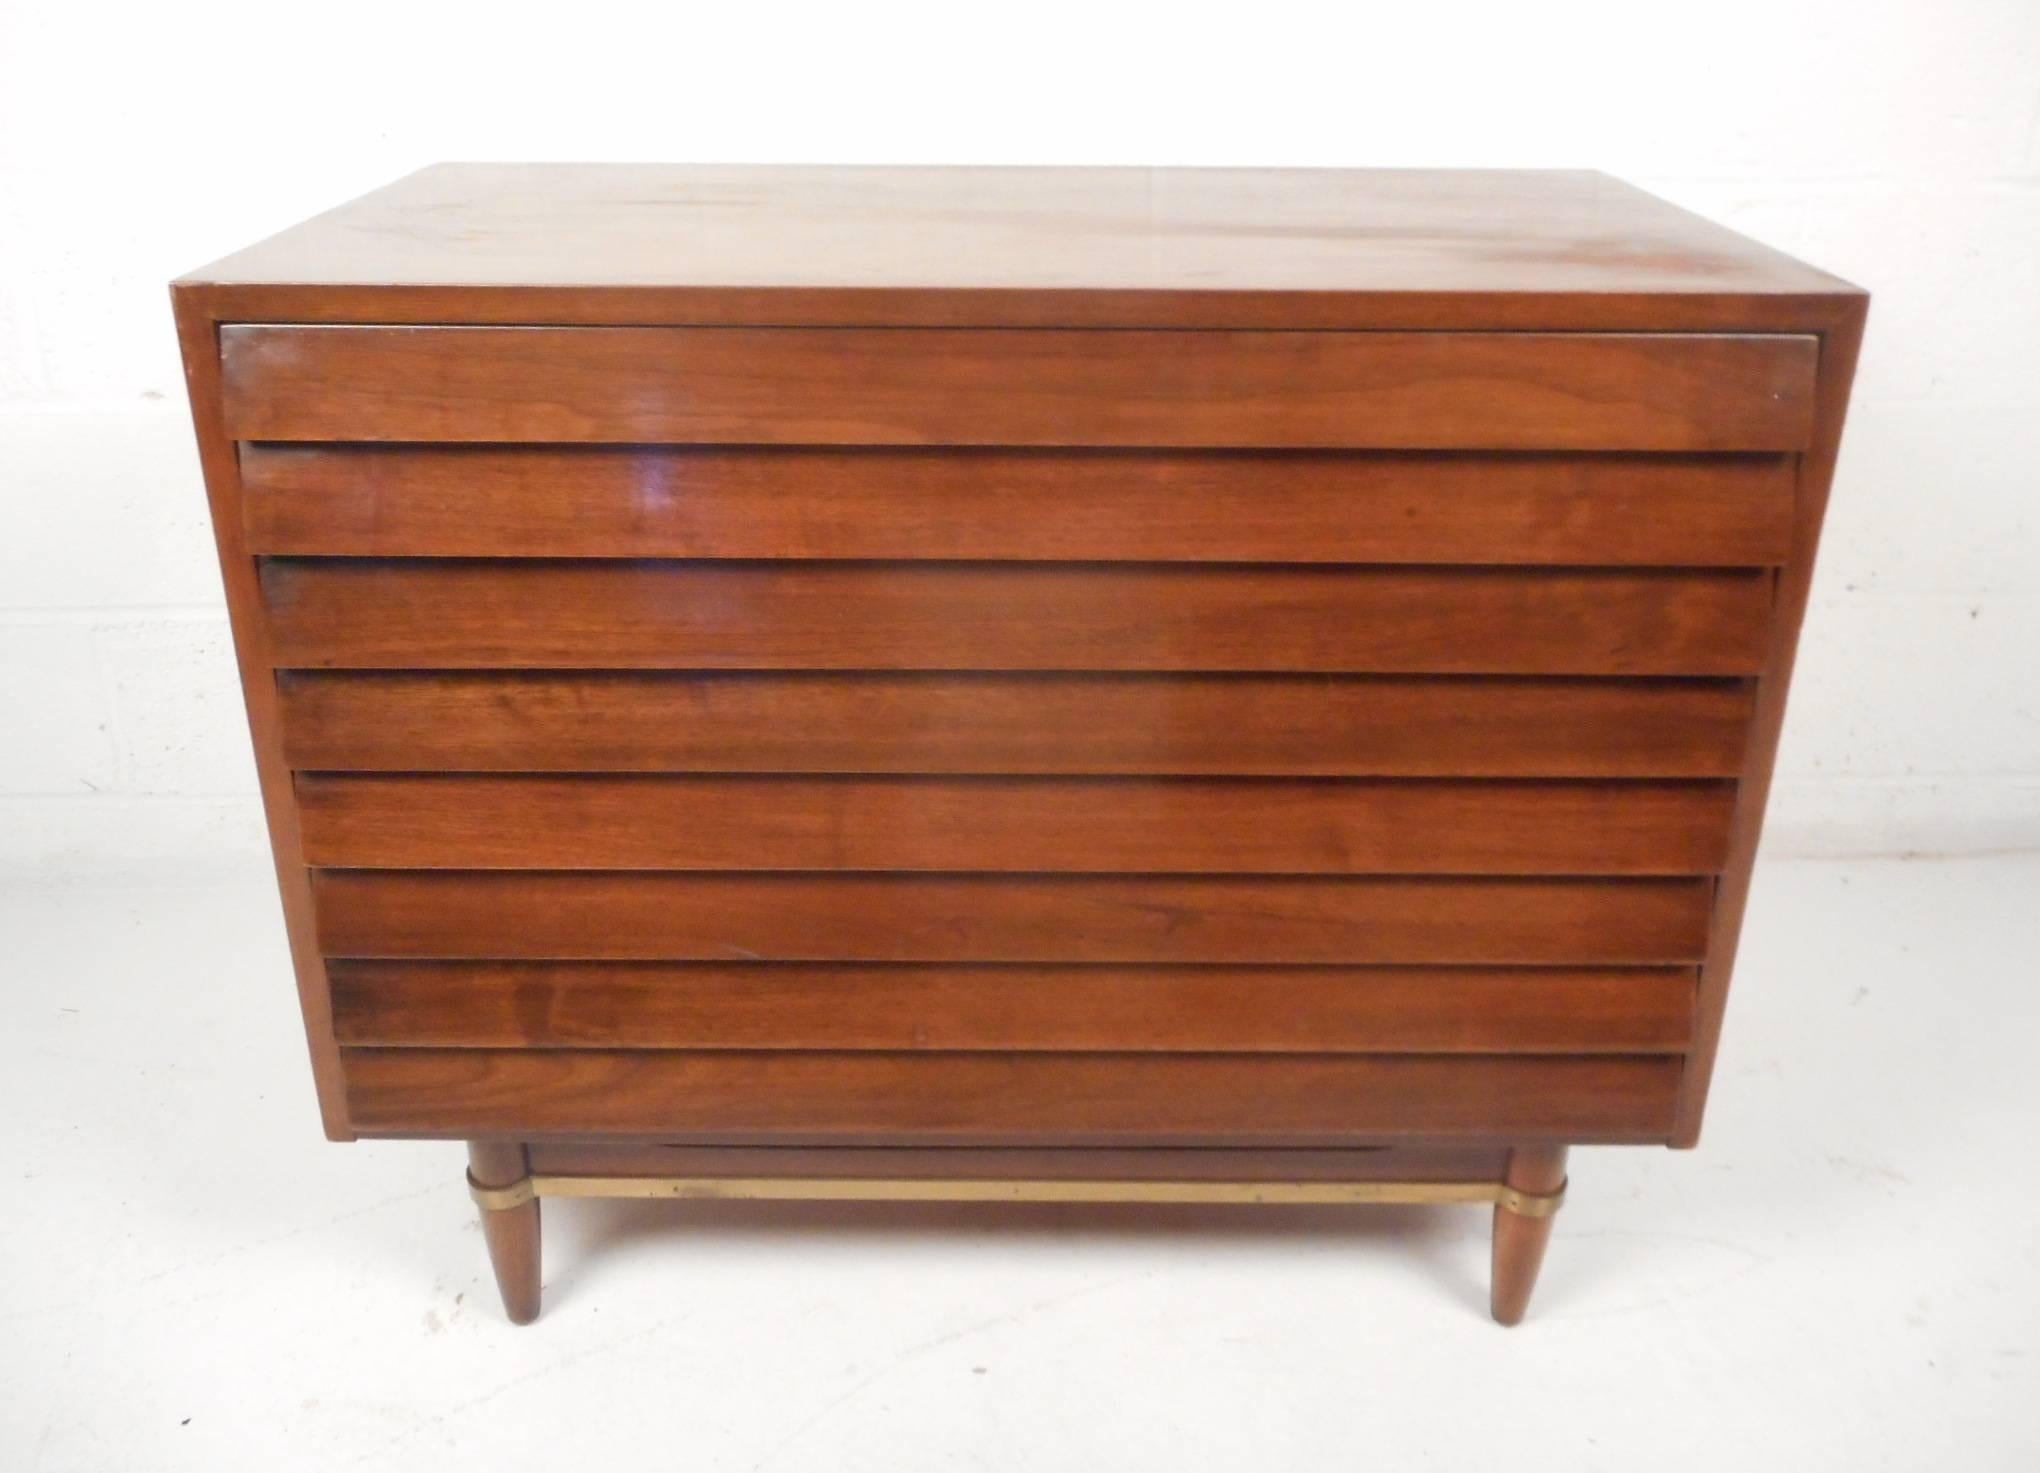 This beautiful vintage modern chest features three large drawers with louvered fronts which function has the pulls. Unique base with brass trim wrapping around the front and sides. Sturdy construction with lovely walnut wood grain sits on top of